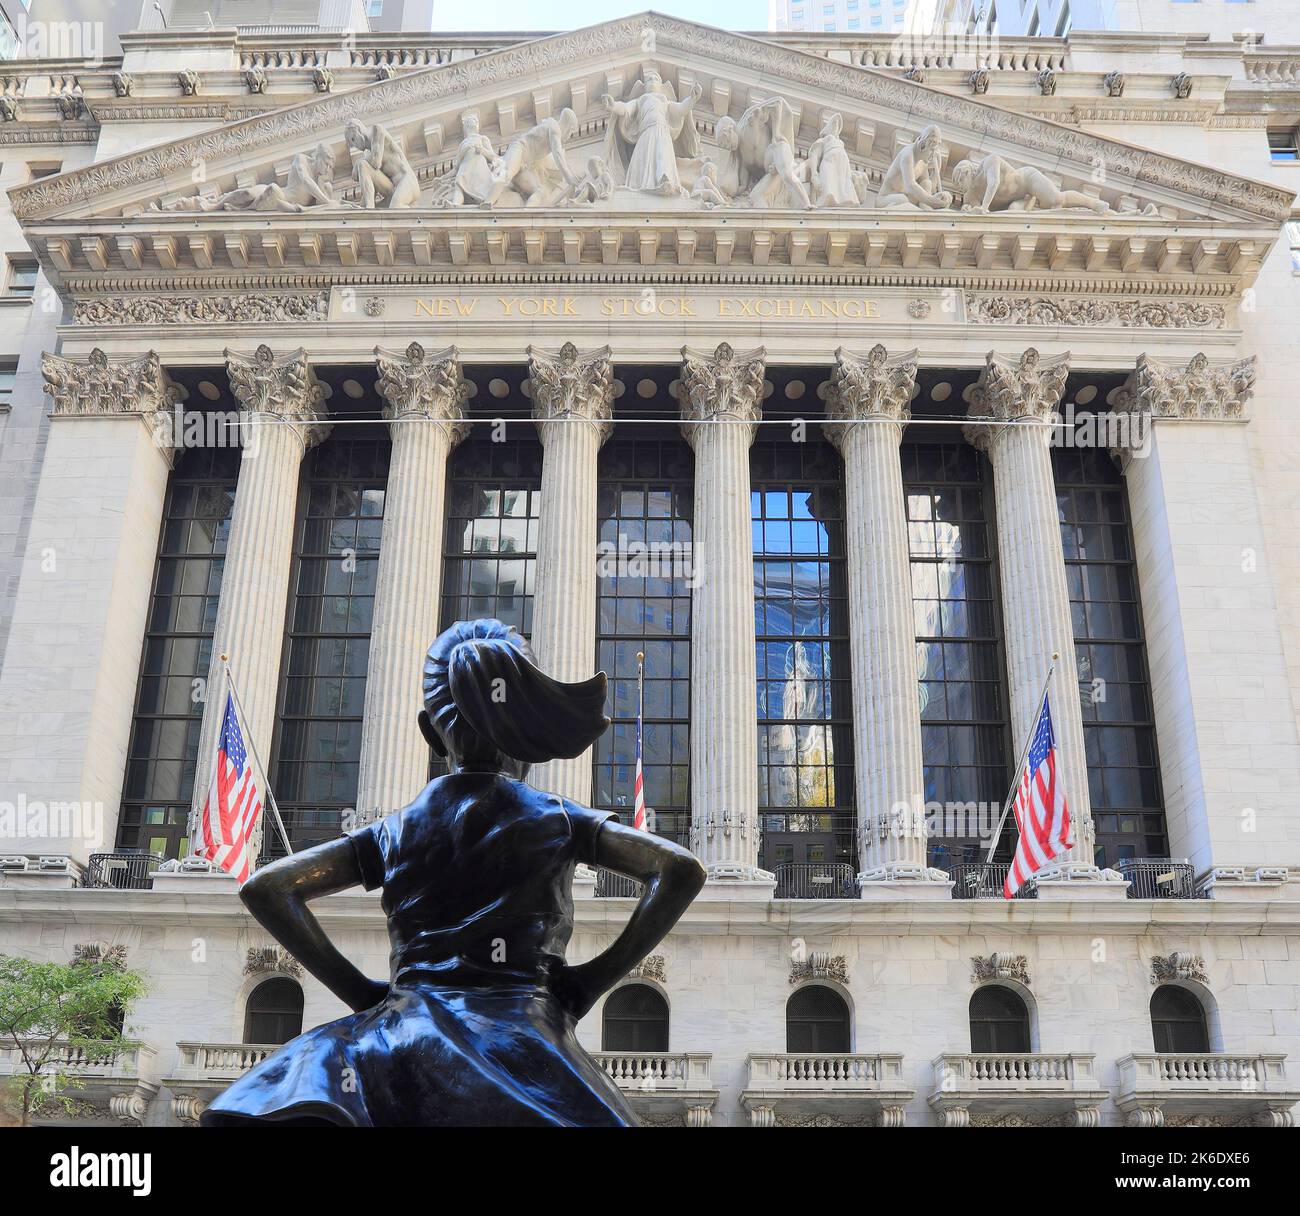 New York Stock Exchange at Wall Street with young girl statue on the foreground, Manhattan. It is the largest stock exchange in the world Stock Photo